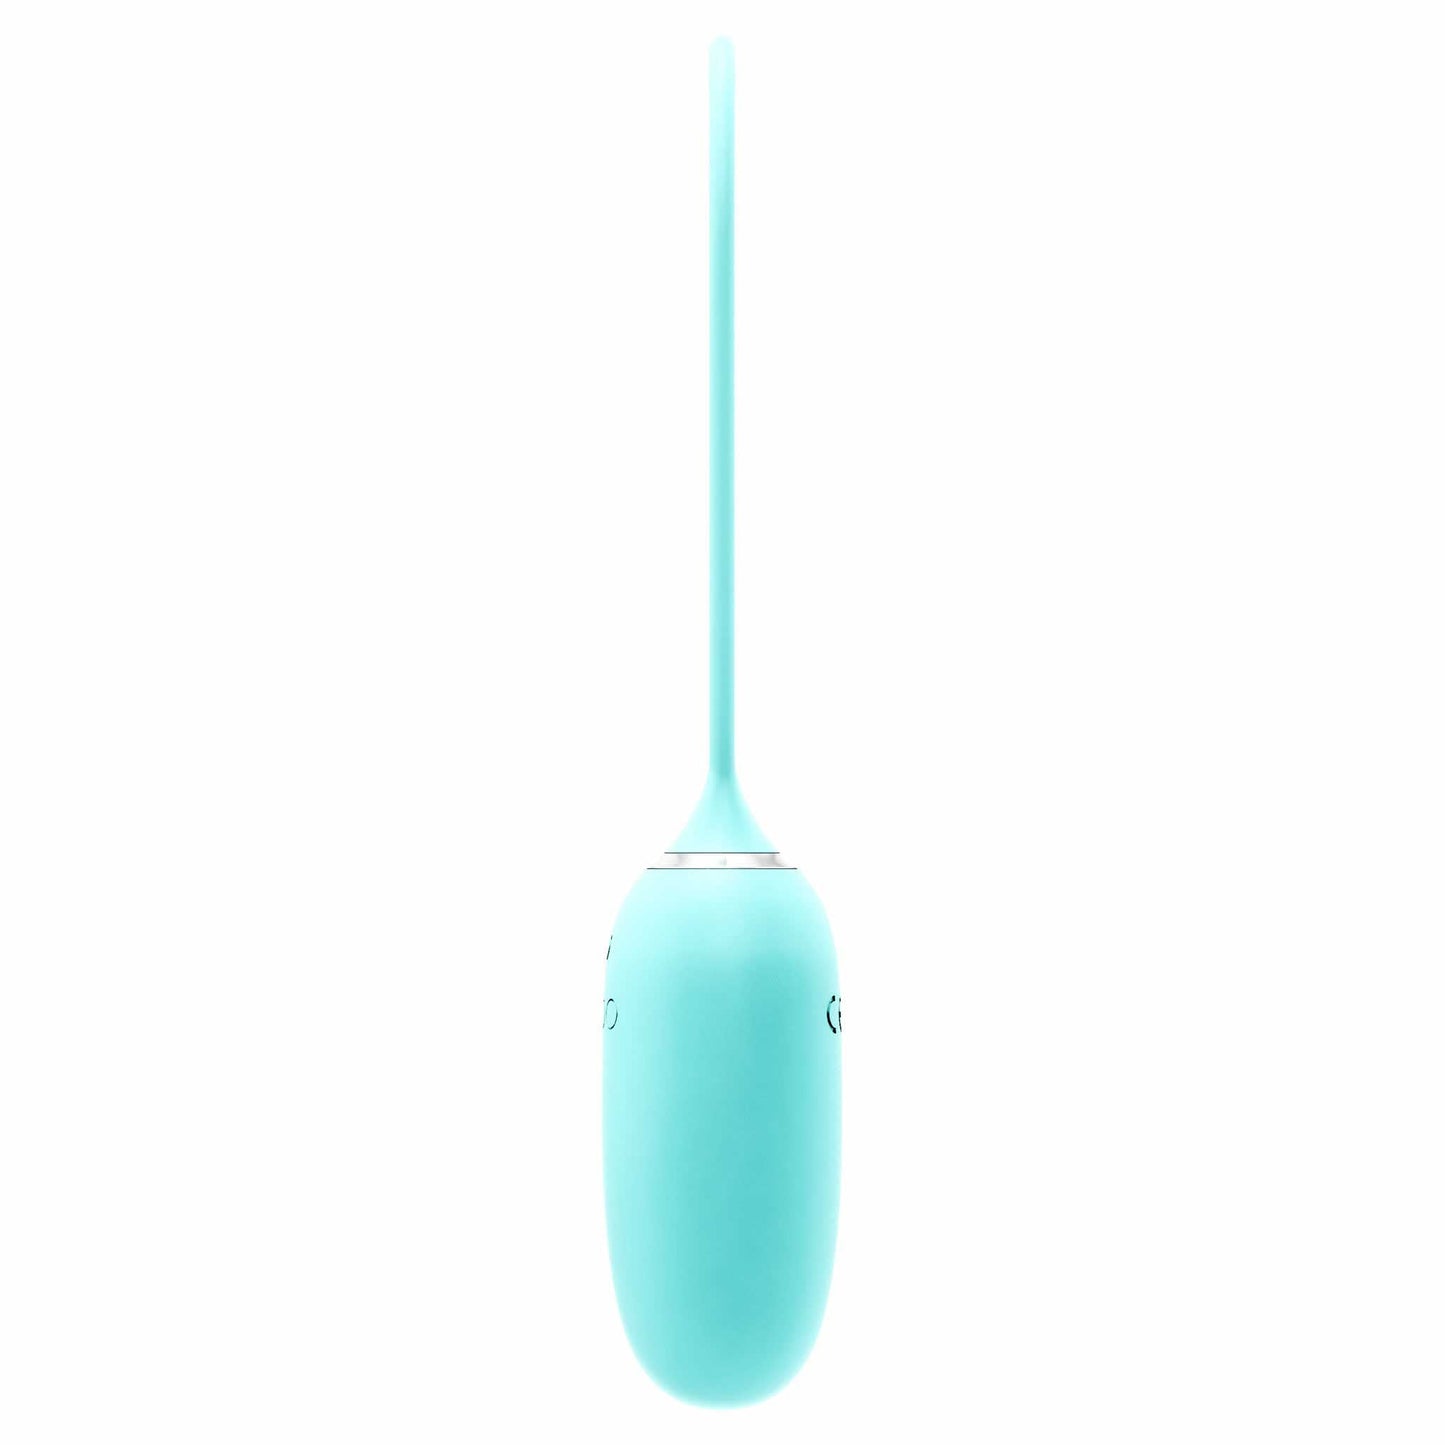 side view of the vedo kiwi rechargeable silicone insertable bullet vibrator savvi-b0613 blue